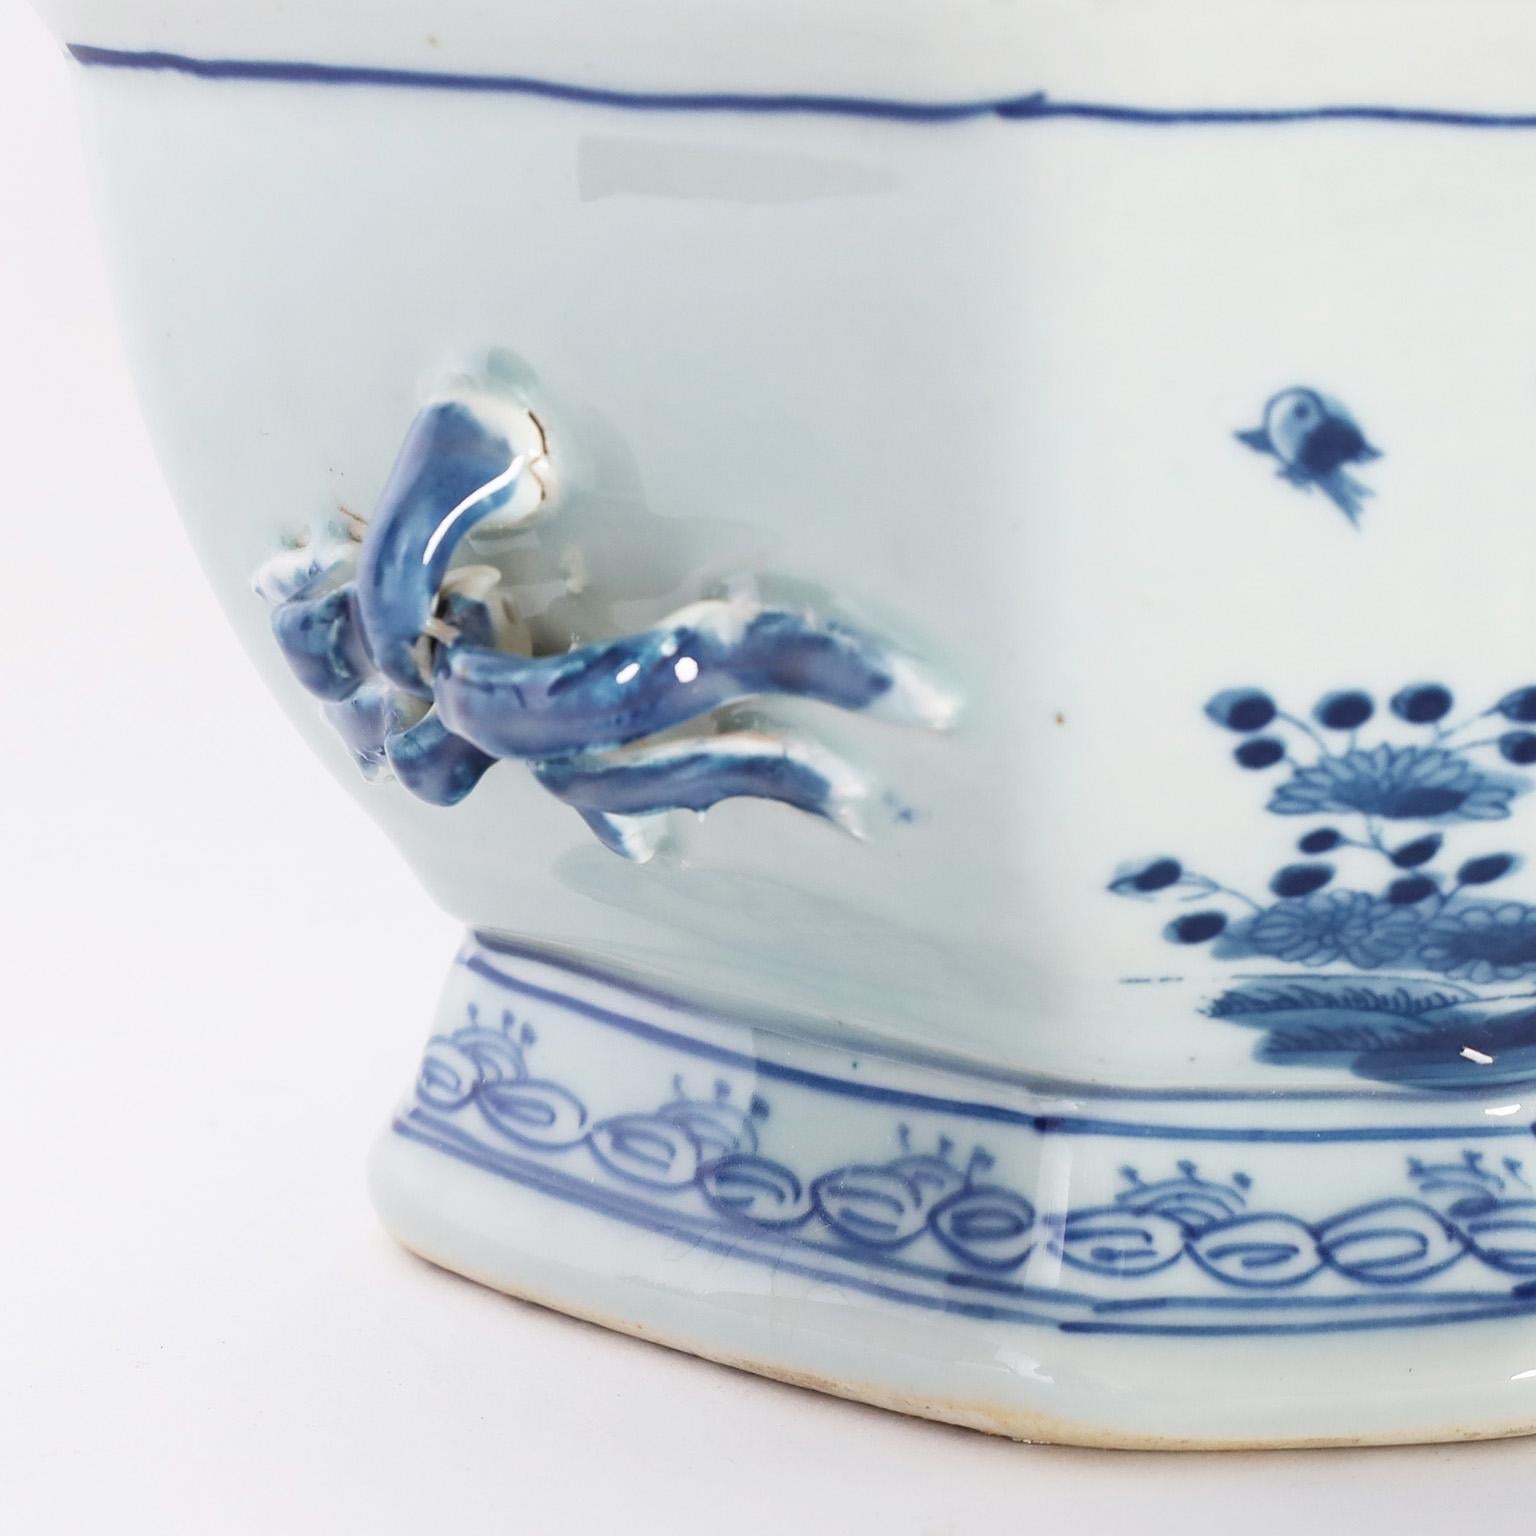 Porcelain Chinese Blue and White Lidded Bowl or Tureen